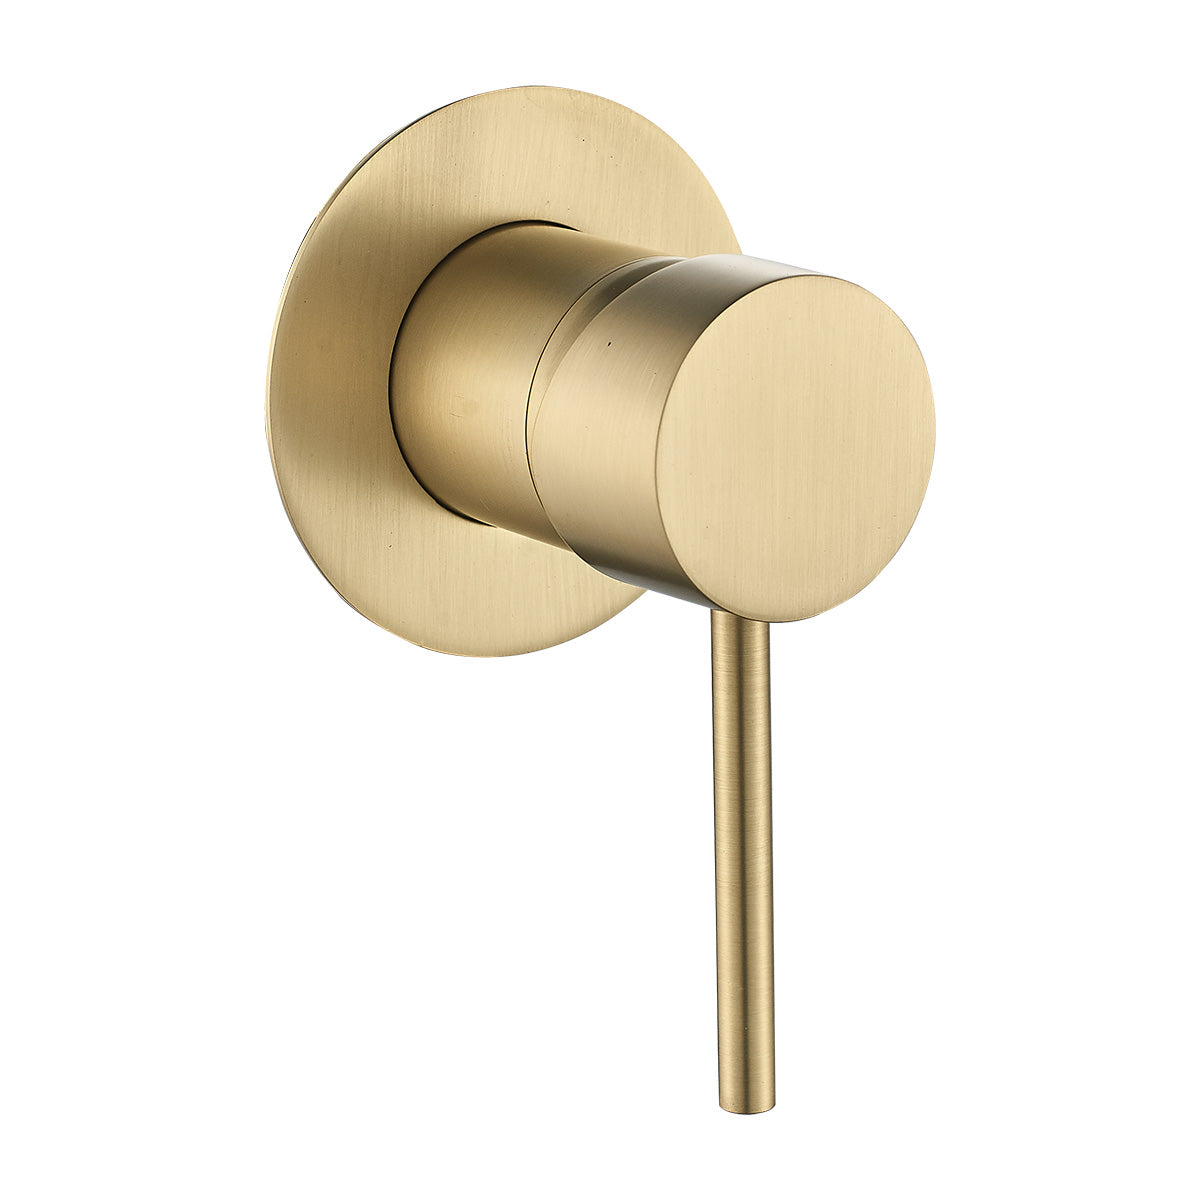 IDW3 (BG) / Ideal Wall Mixer (Brushed Gold) - Hellycar Brushed Gold Wall Tap - Pin Lever Mixer Tap